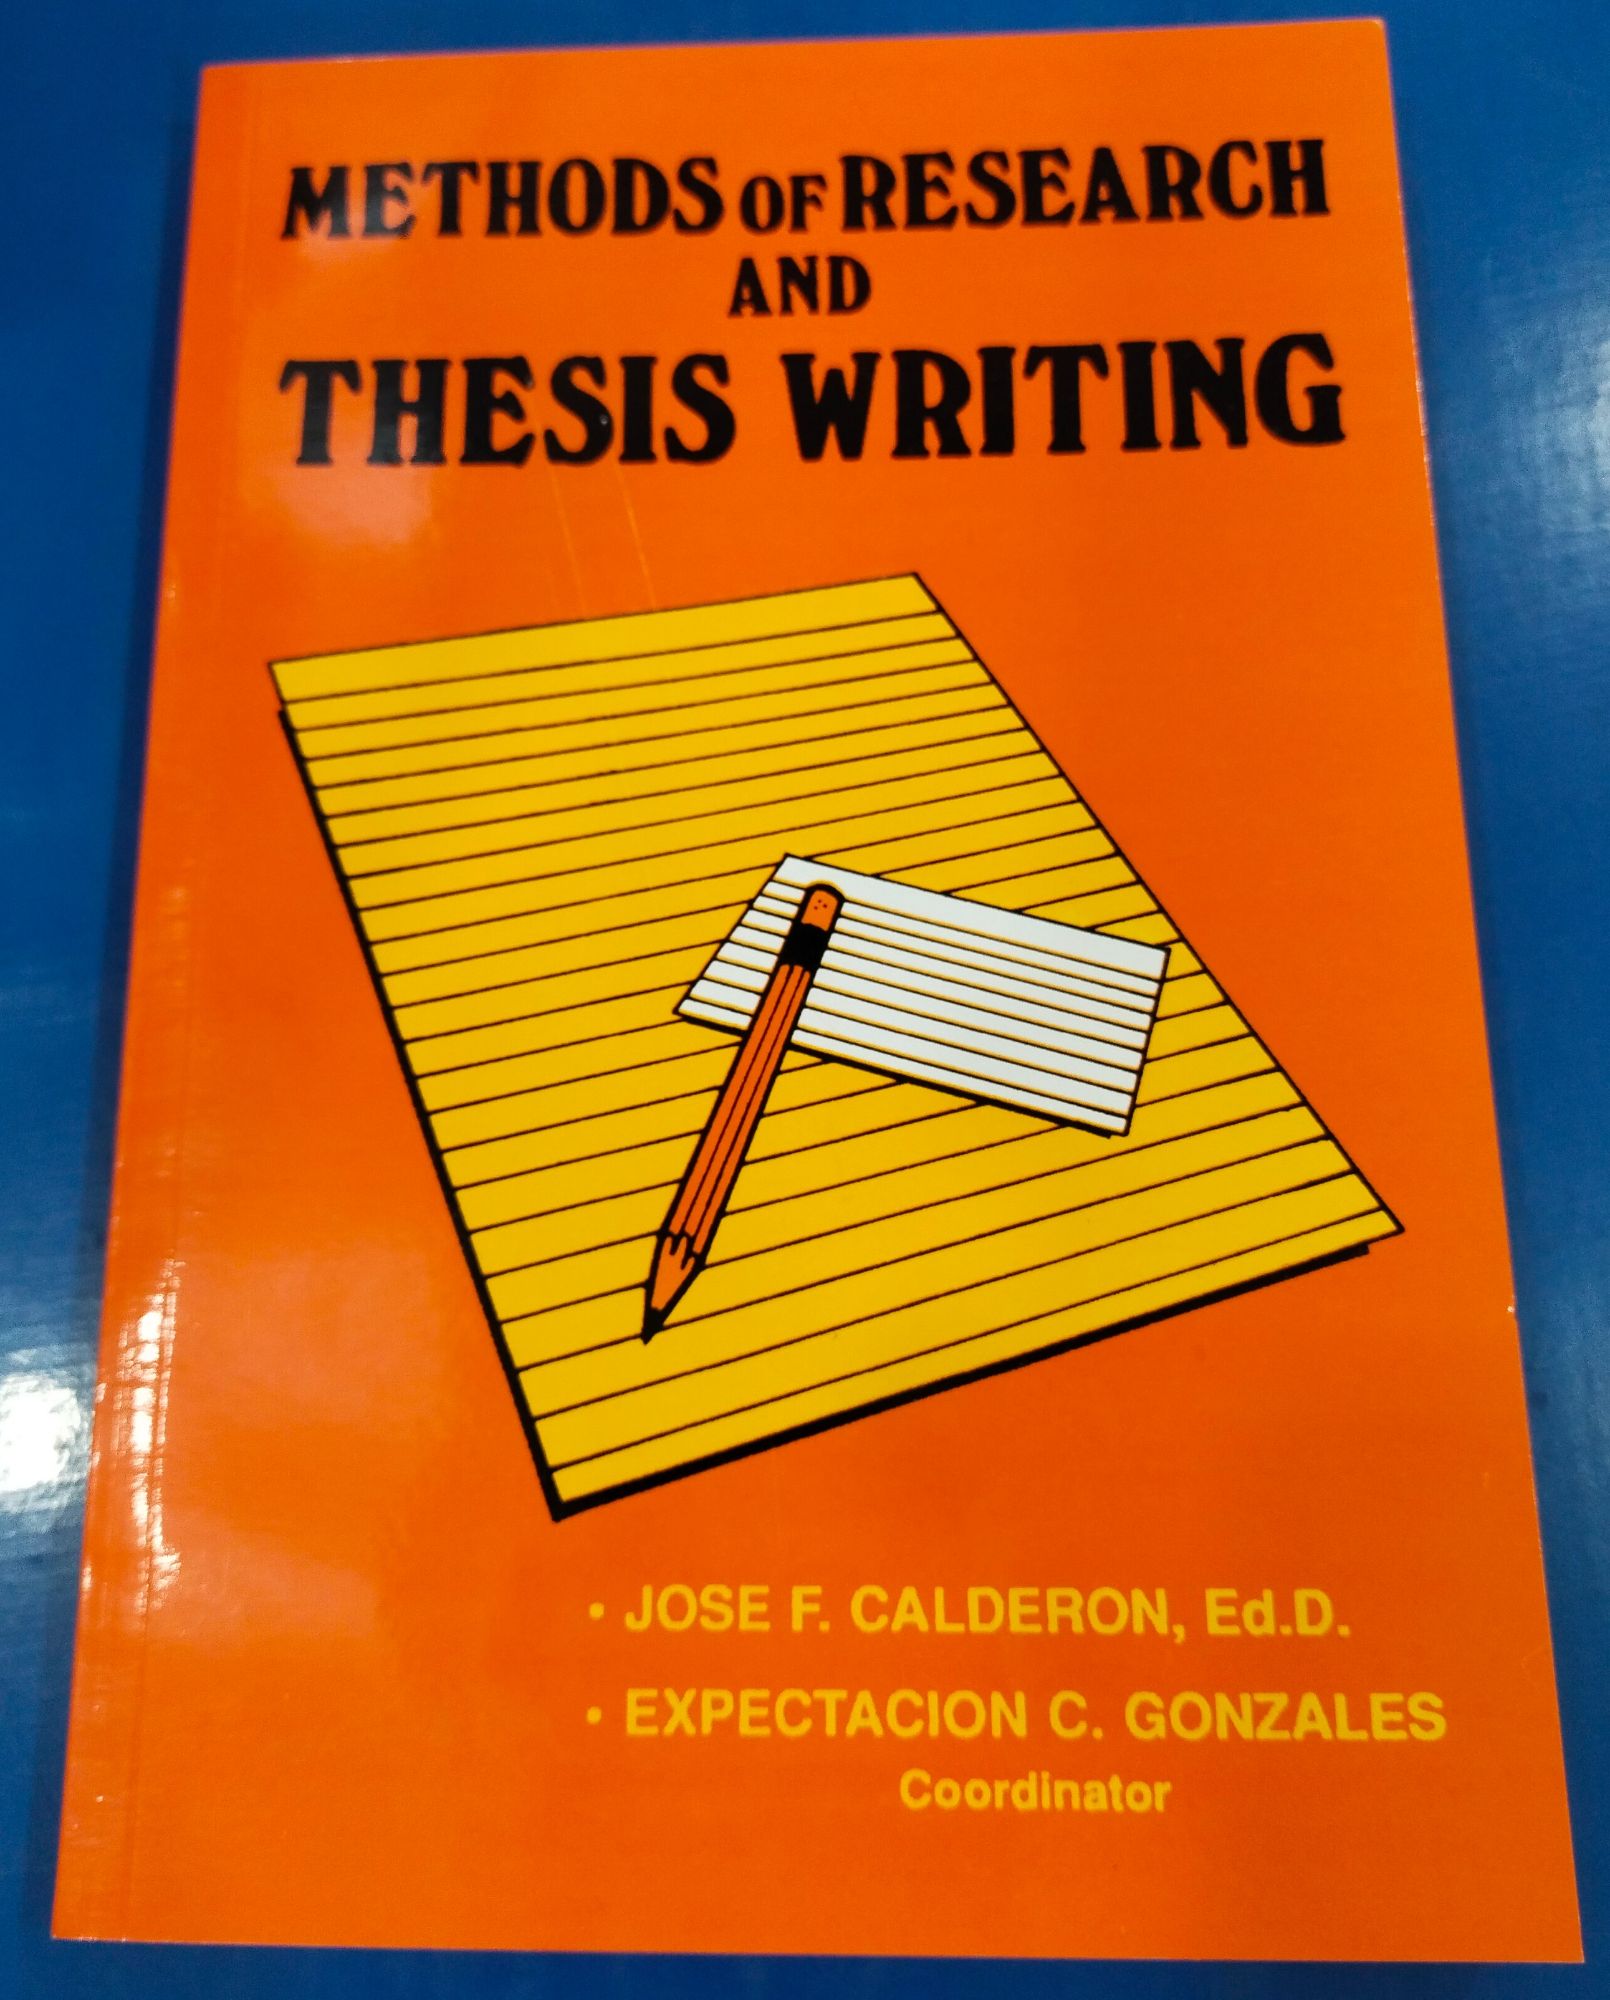 methods of research and thesis writing book